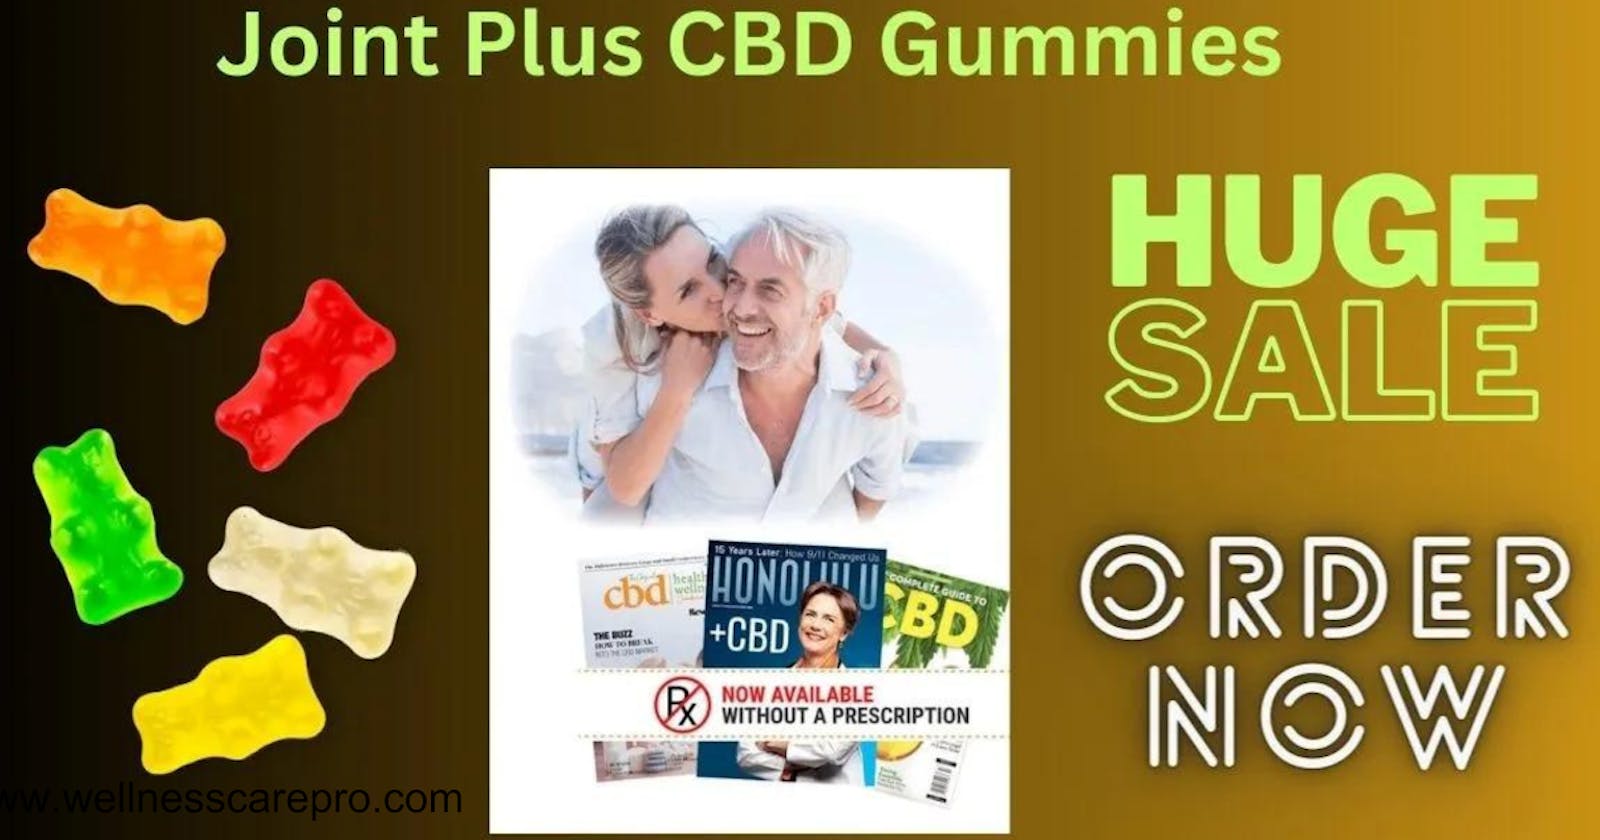 Joint Plus CBD Gummies: Reviews, Benefits,  Healthy Sleep, Joint Pain, Ingredients, Cost & Buy Now?